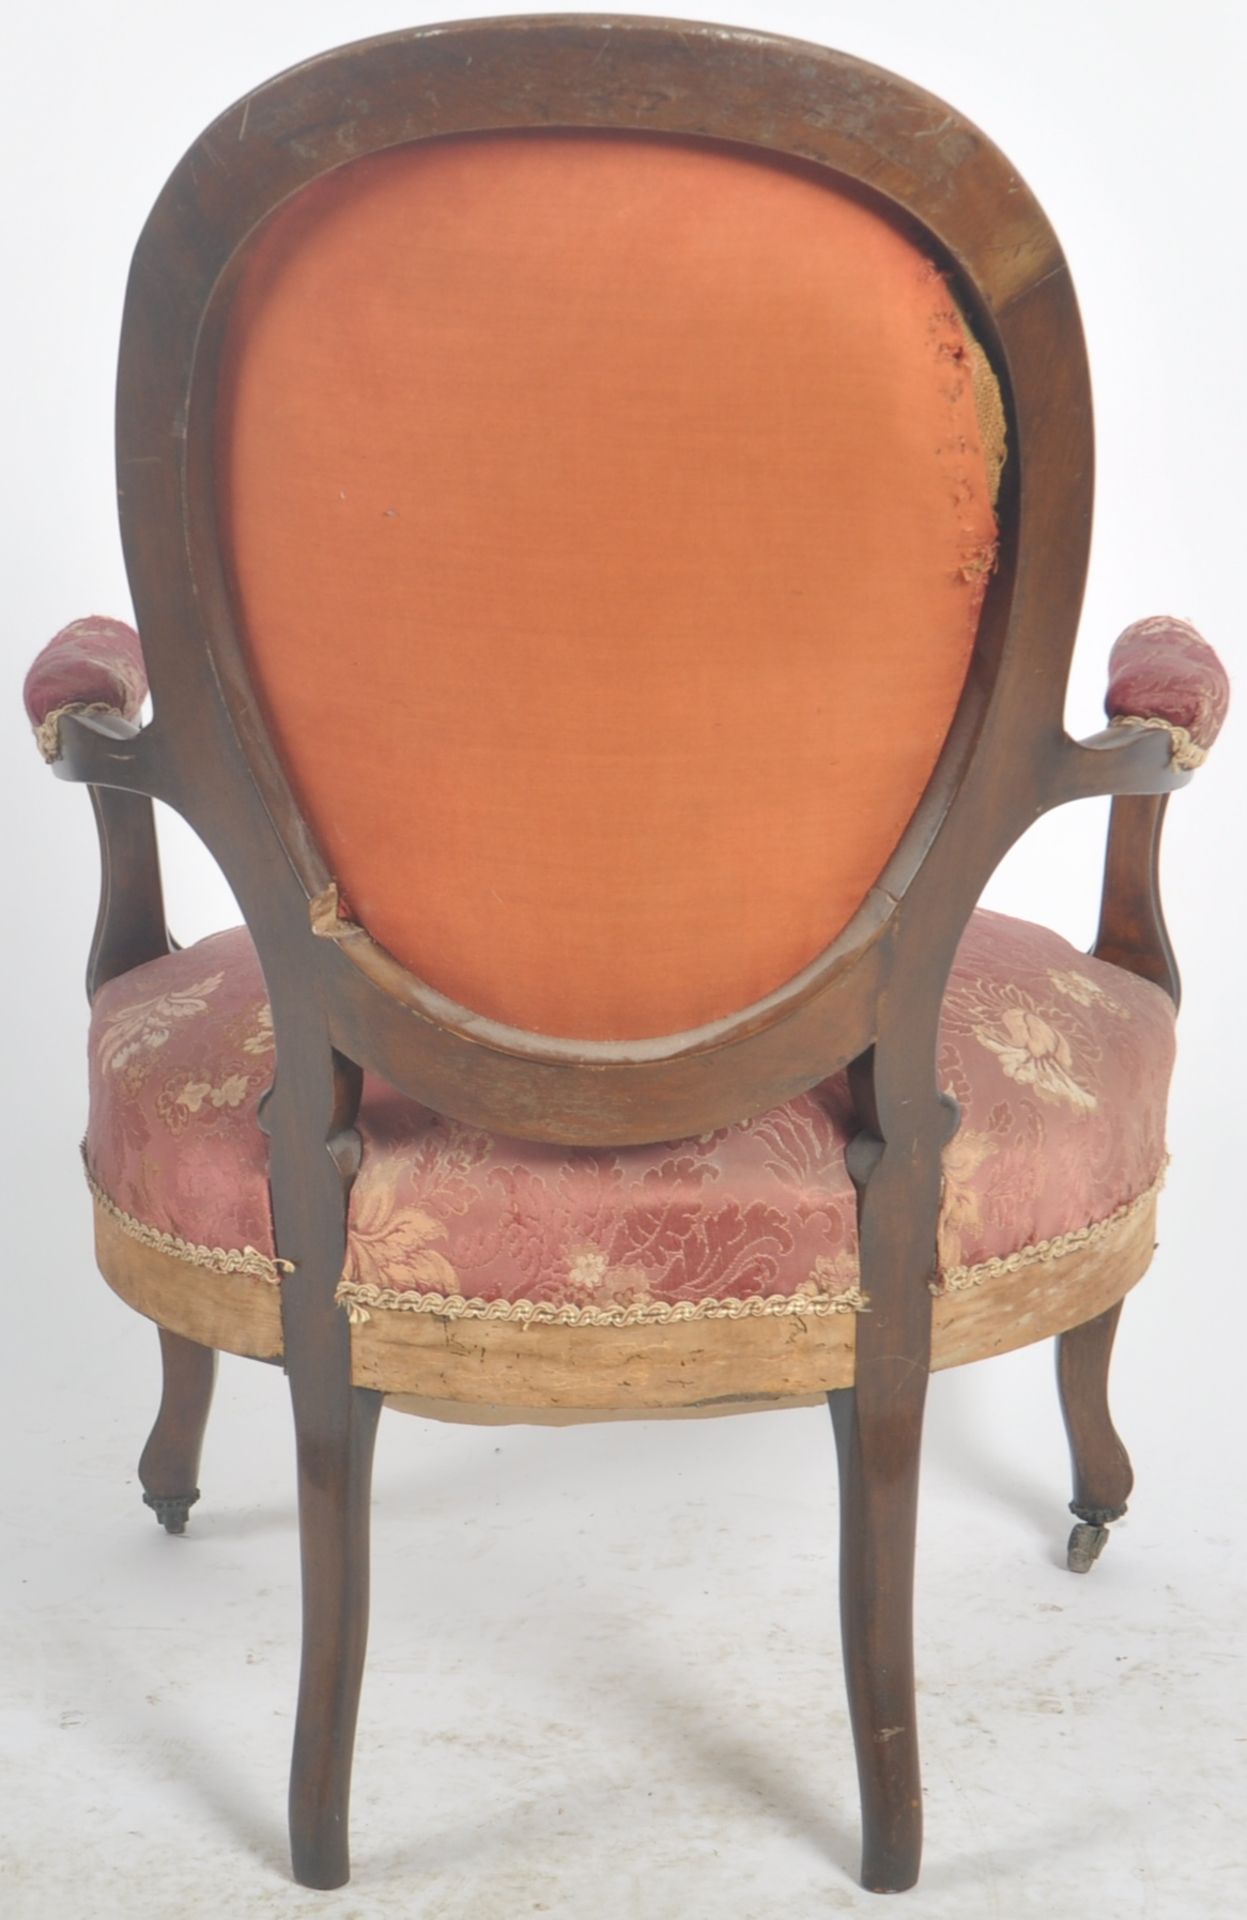 19TH CENTURY VICTORIAN ROSEWOOD SALON CHAIR - Image 6 of 6